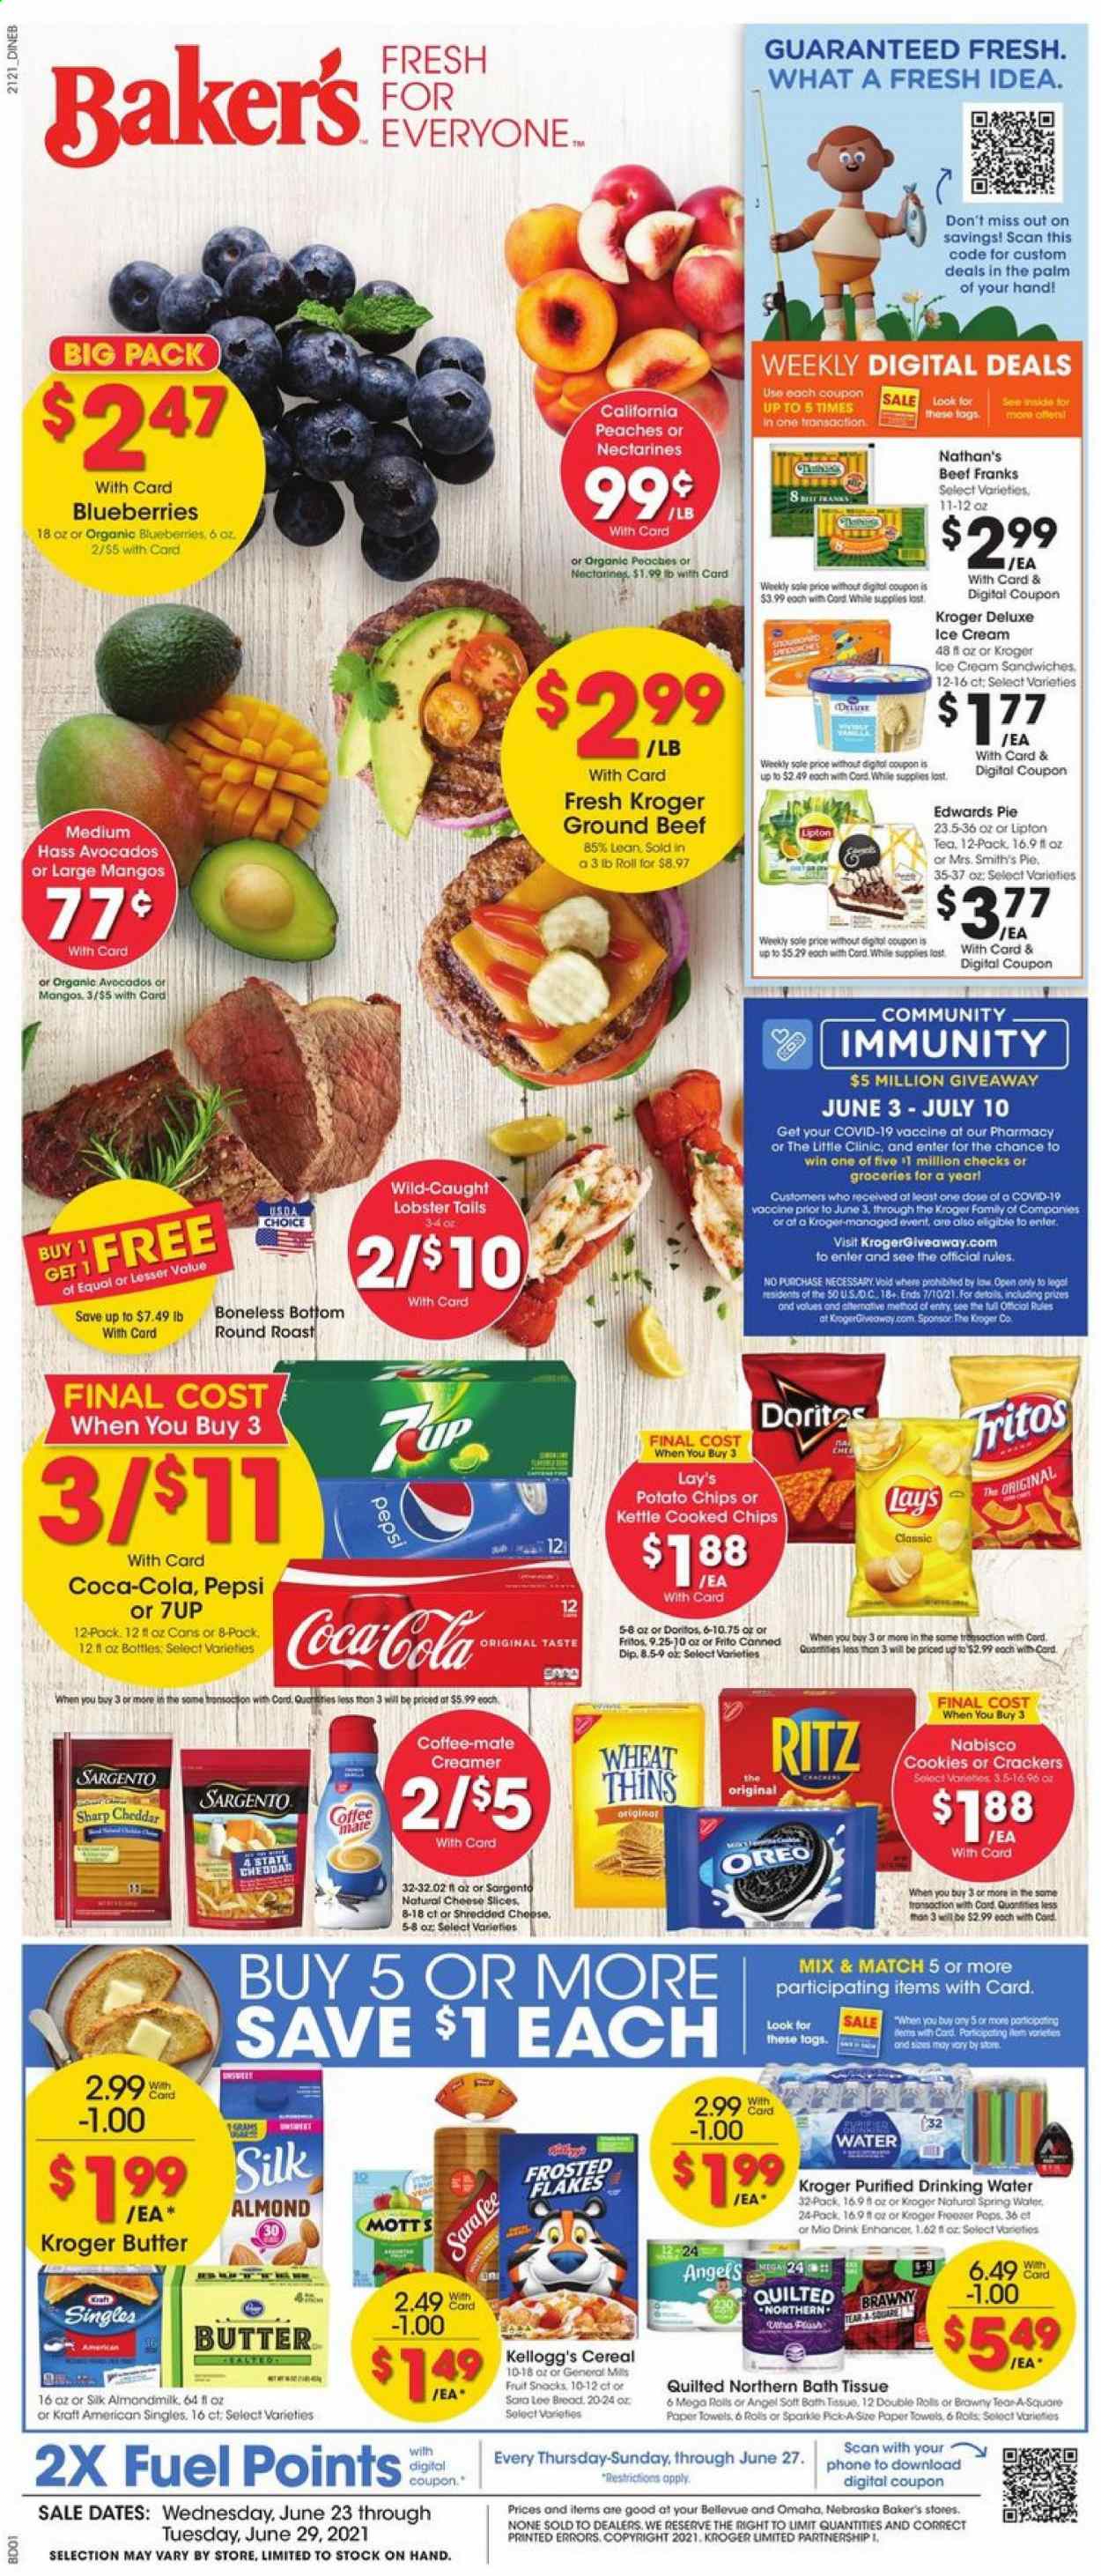 thumbnail - Baker's Flyer - 06/23/2021 - 06/29/2021 - Sales products - pie, avocado, blueberries, mango, Mott's, lobster, lobster tail, sandwich, Kraft®, sliced cheese, cheese, Kraft Singles, Sargento, Oreo, almond milk, Coffee-Mate, Silk, butter, creamer, dip, ice cream, cookies, crackers, Kellogg's, RITZ, Doritos, Fritos, potato chips, chips, Lay’s, Smith's, Thins, cereals, Frosted Flakes, Coca-Cola, Pepsi, Lipton, 7UP, tea, beef meat, ground beef, round roast, bath tissue, Quilted Northern, kitchen towels, paper towels, Bakers, phone, nectarines, peaches. Page 1.